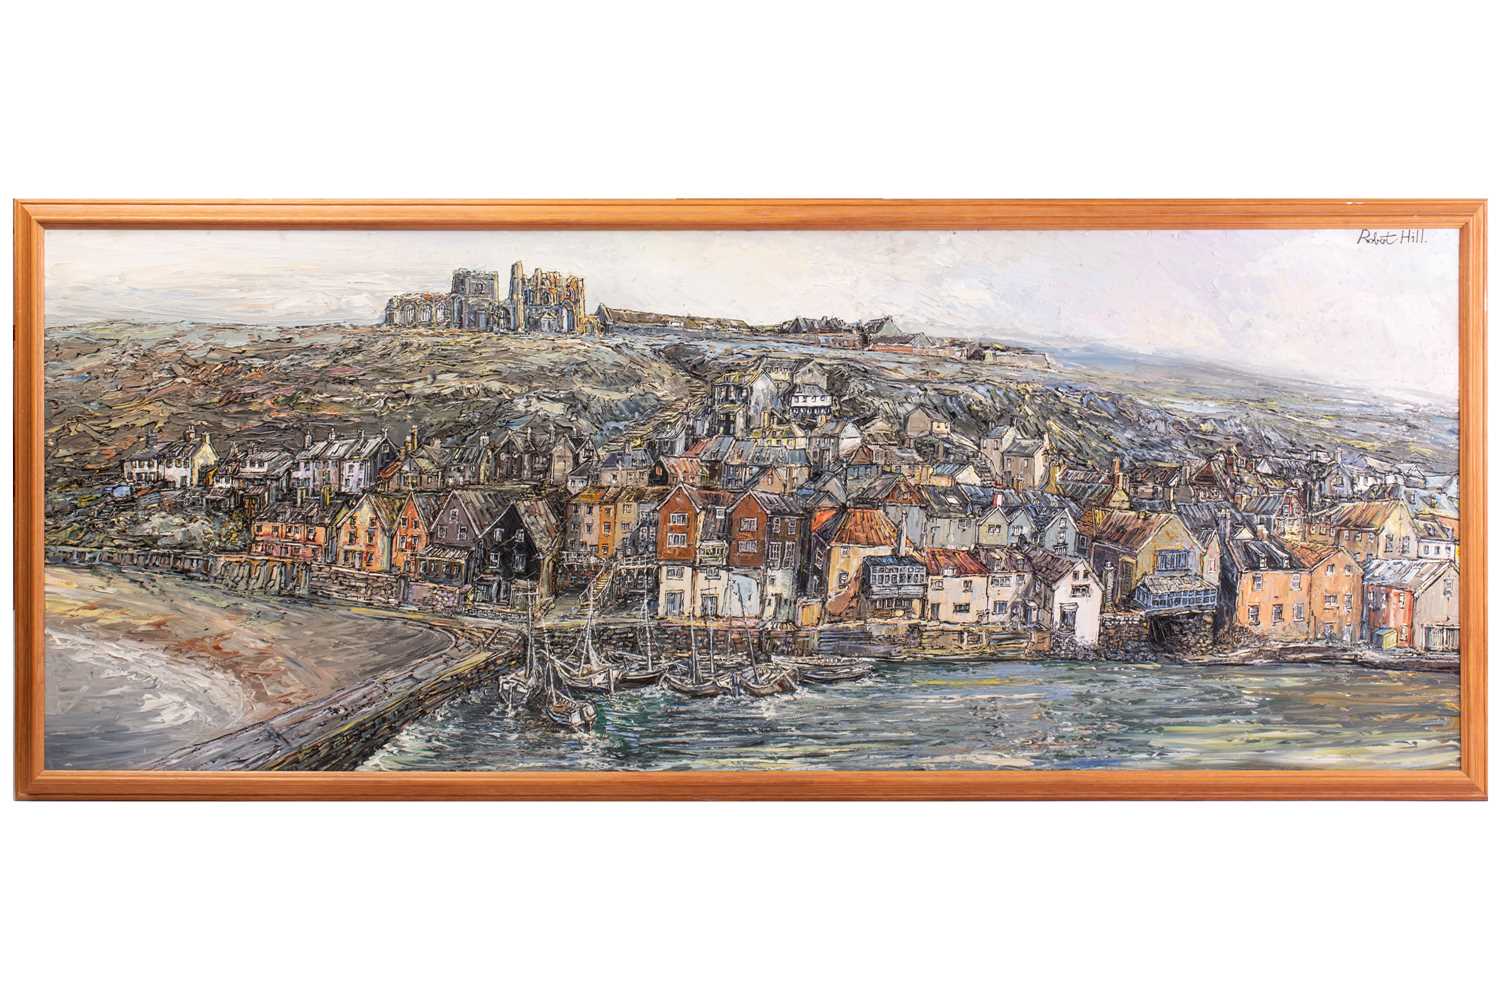 Robert William Hill (1932 - 1990), Panorama of Whitby and the Abbey, signed, oil on board, 75 x